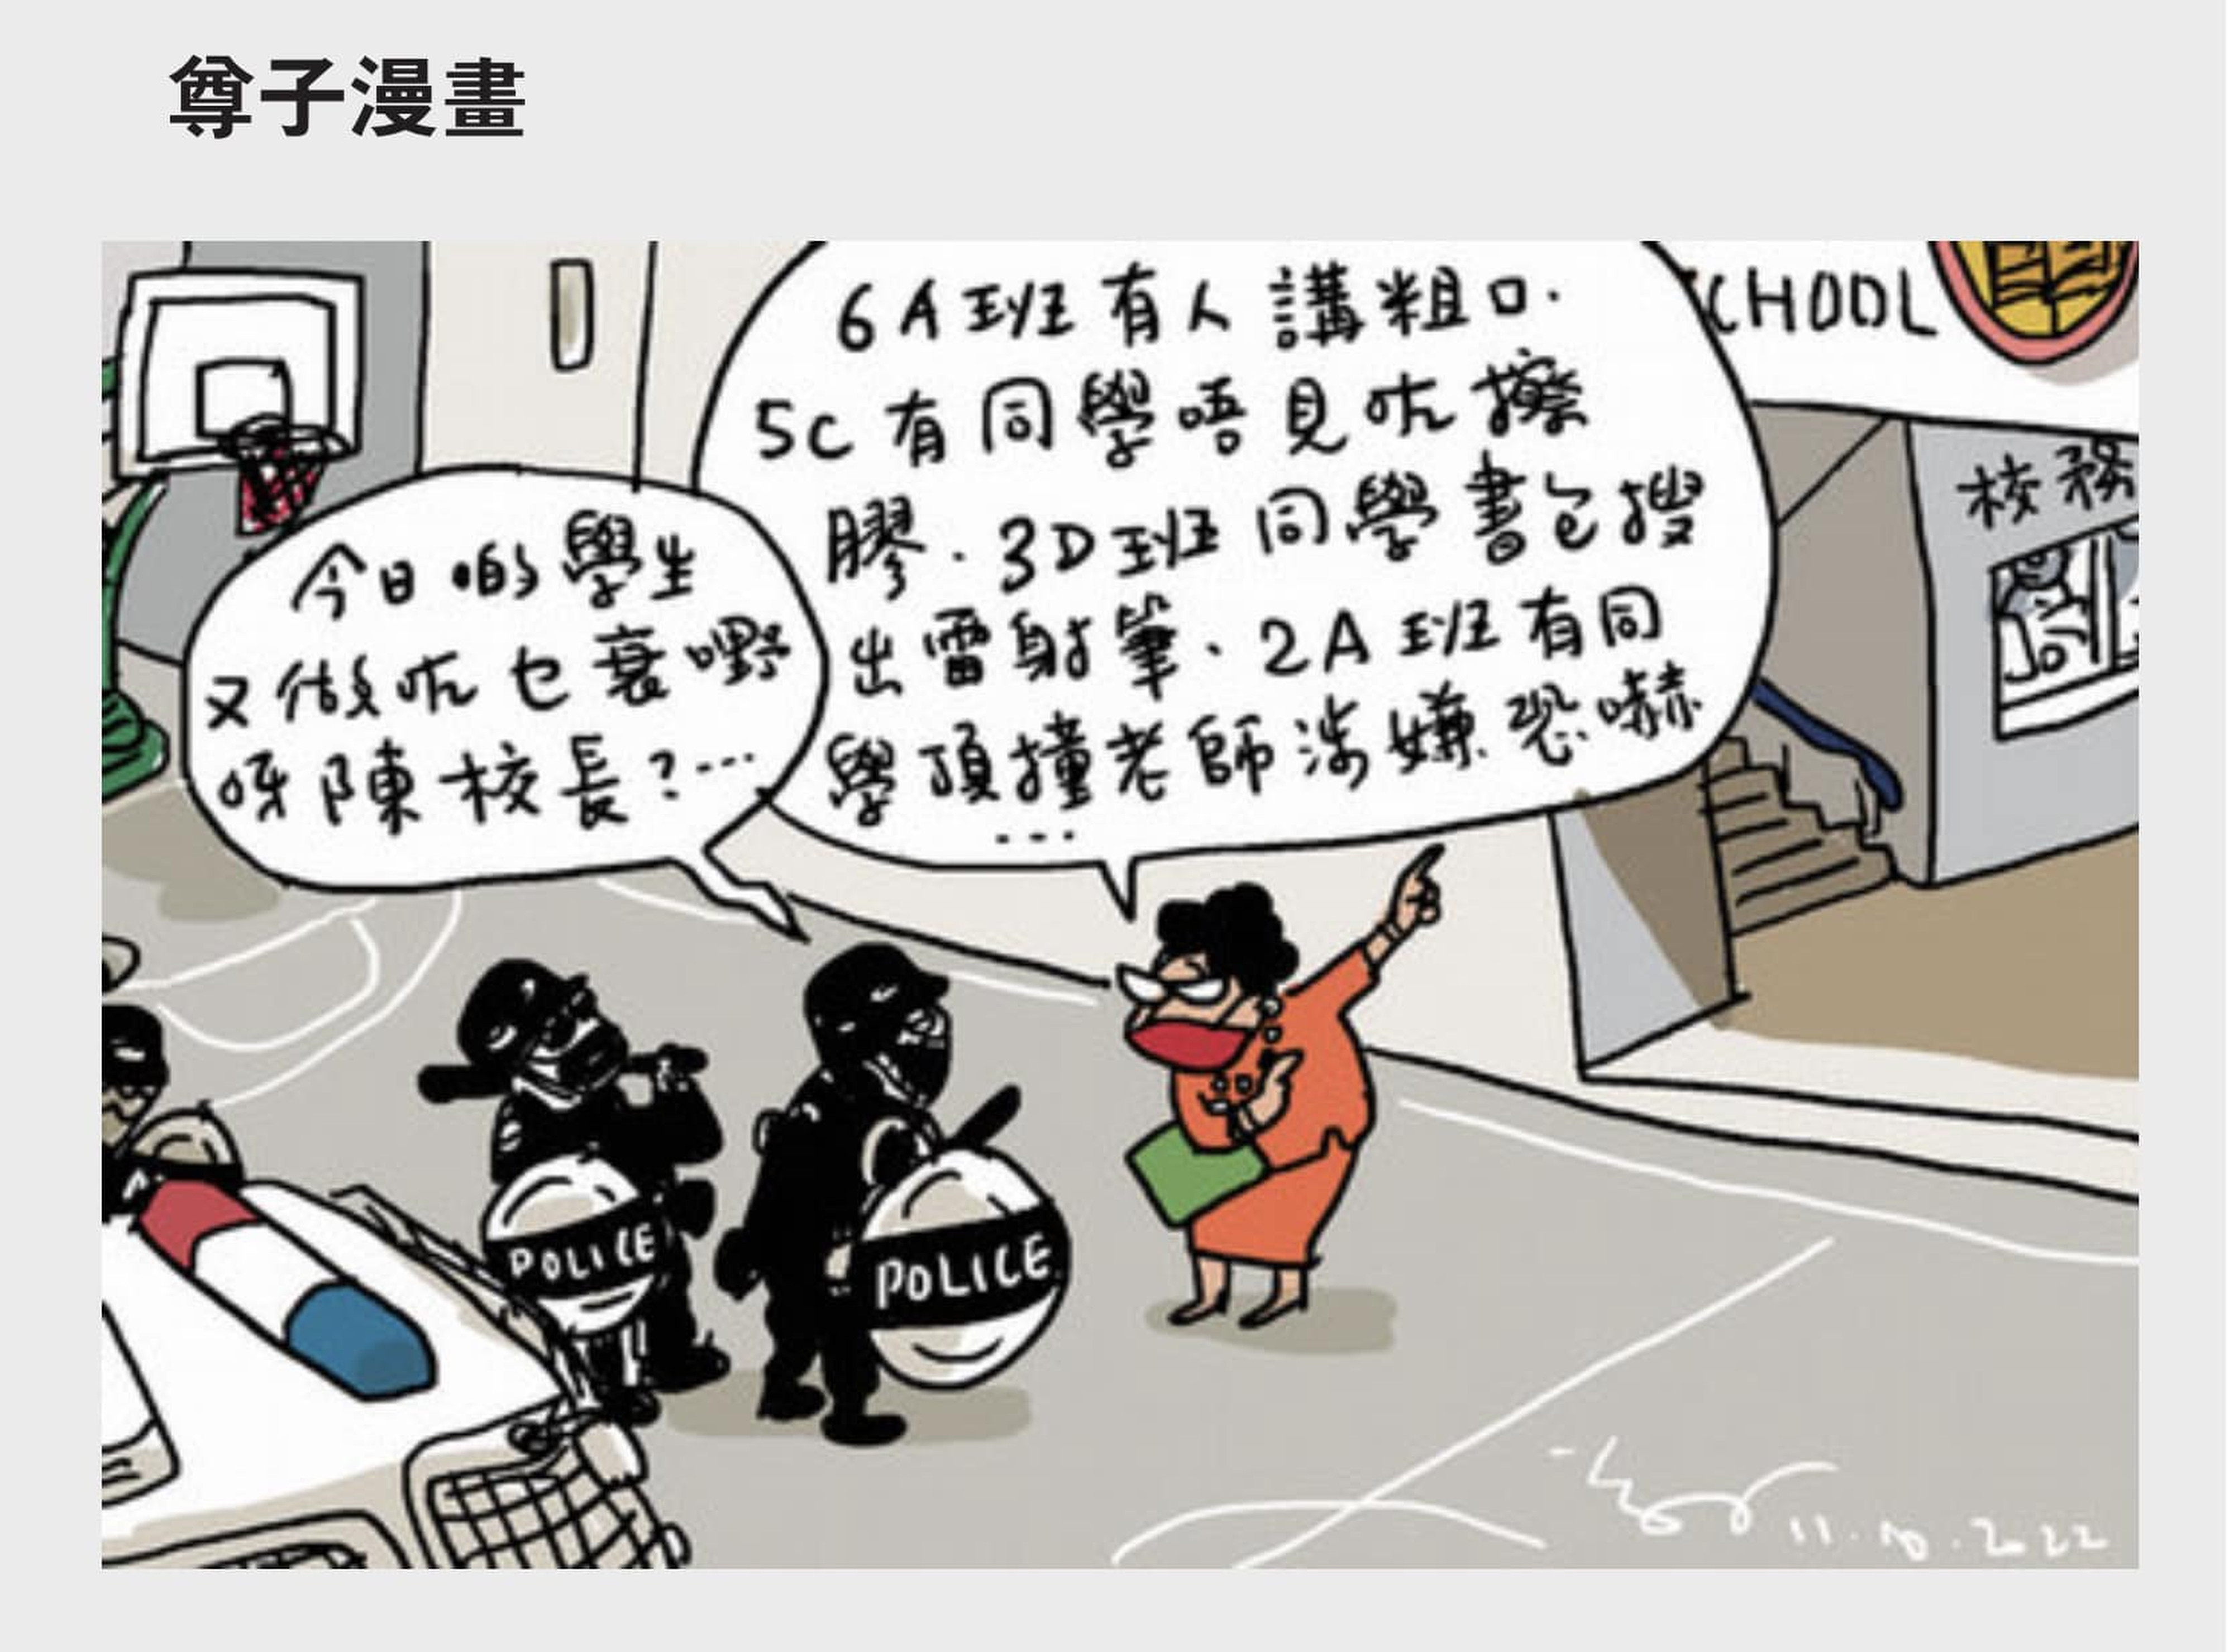 The newspaper cartoon that landed artist Zunzi in hot water with the police force. Photo: Mingpao.
